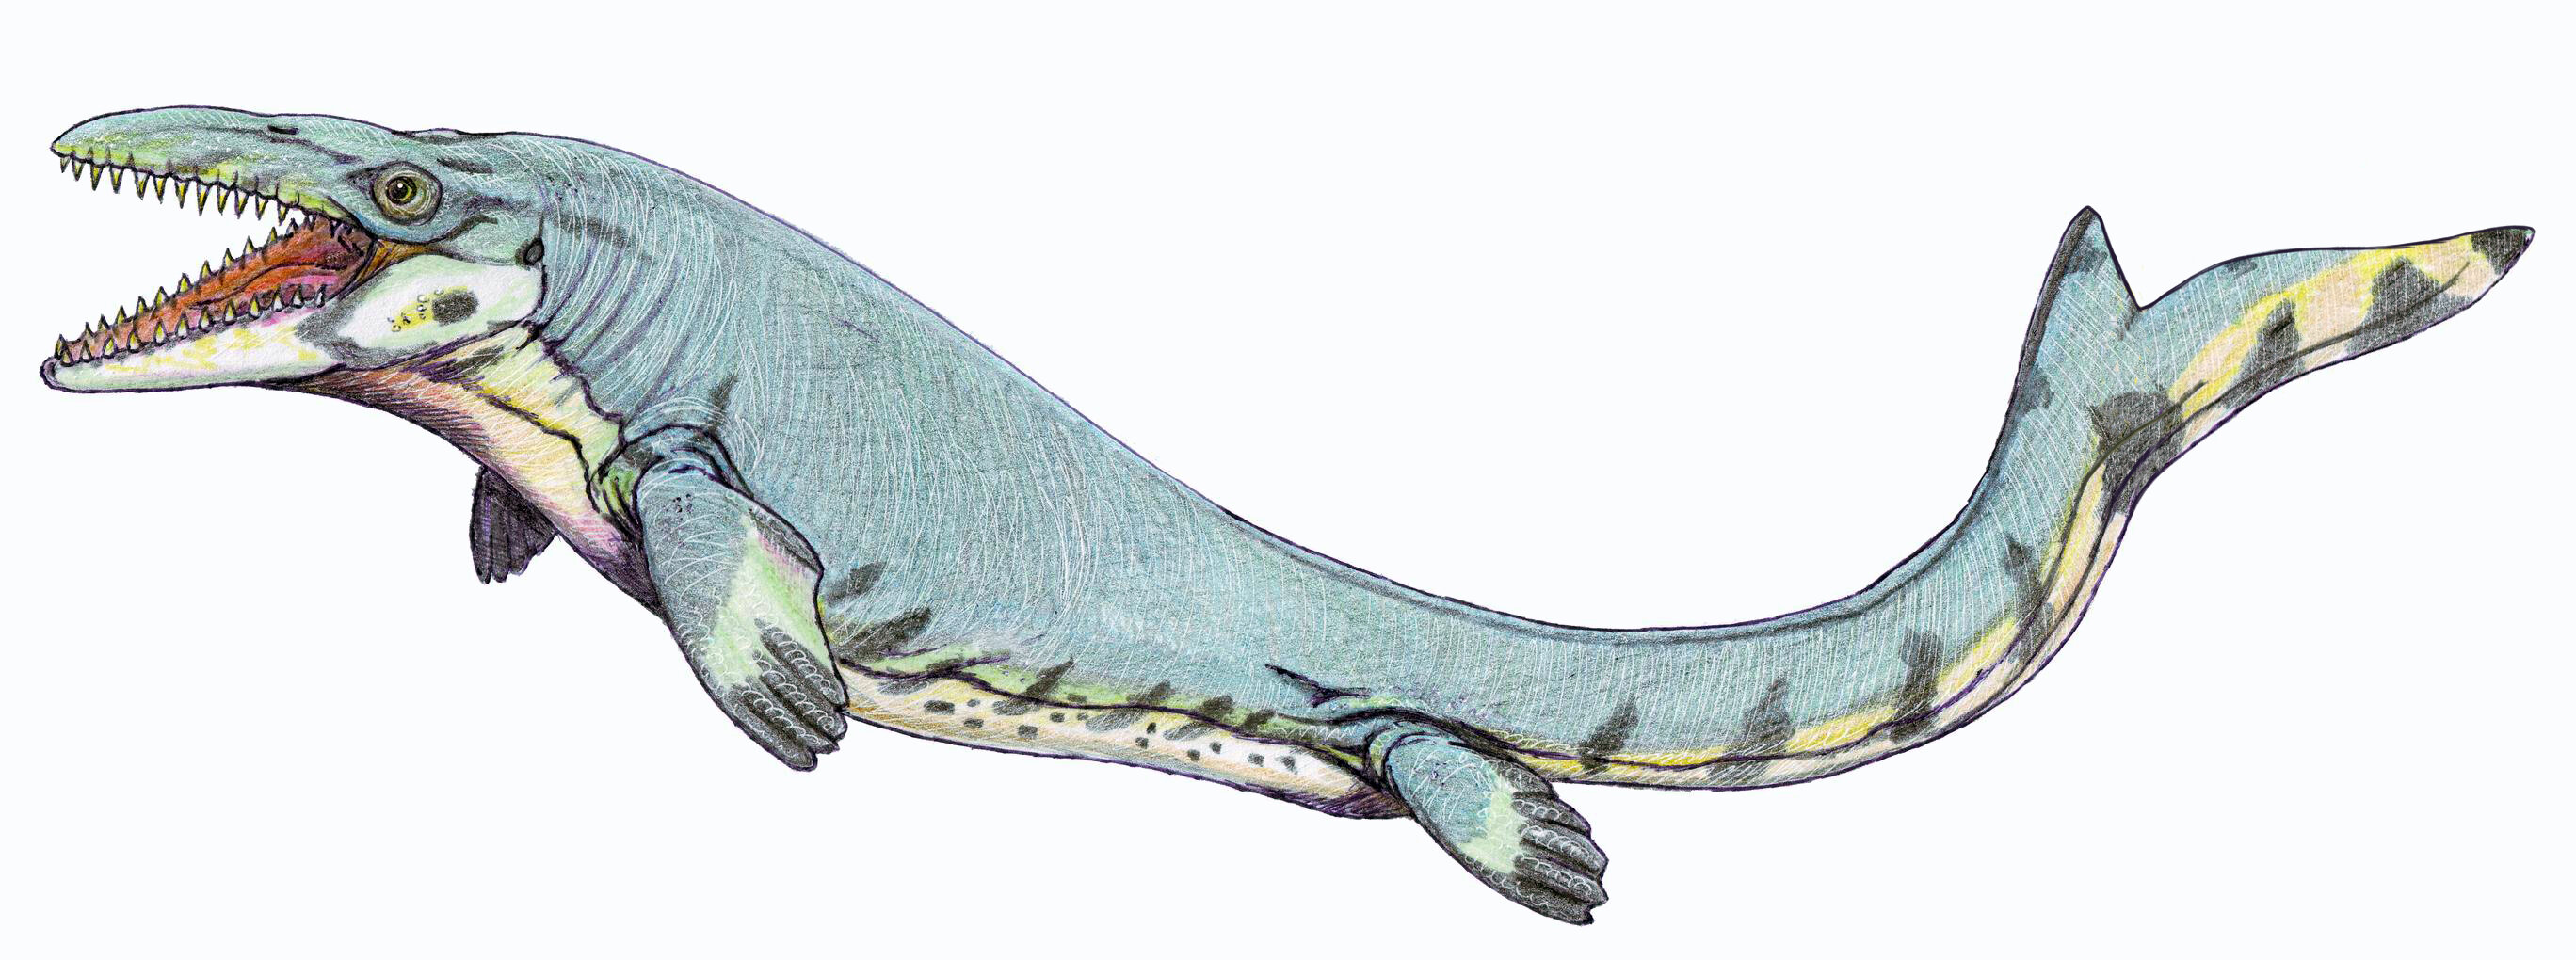 Fossils of 30-foot prehistoric marine lizard unearthed in Texas